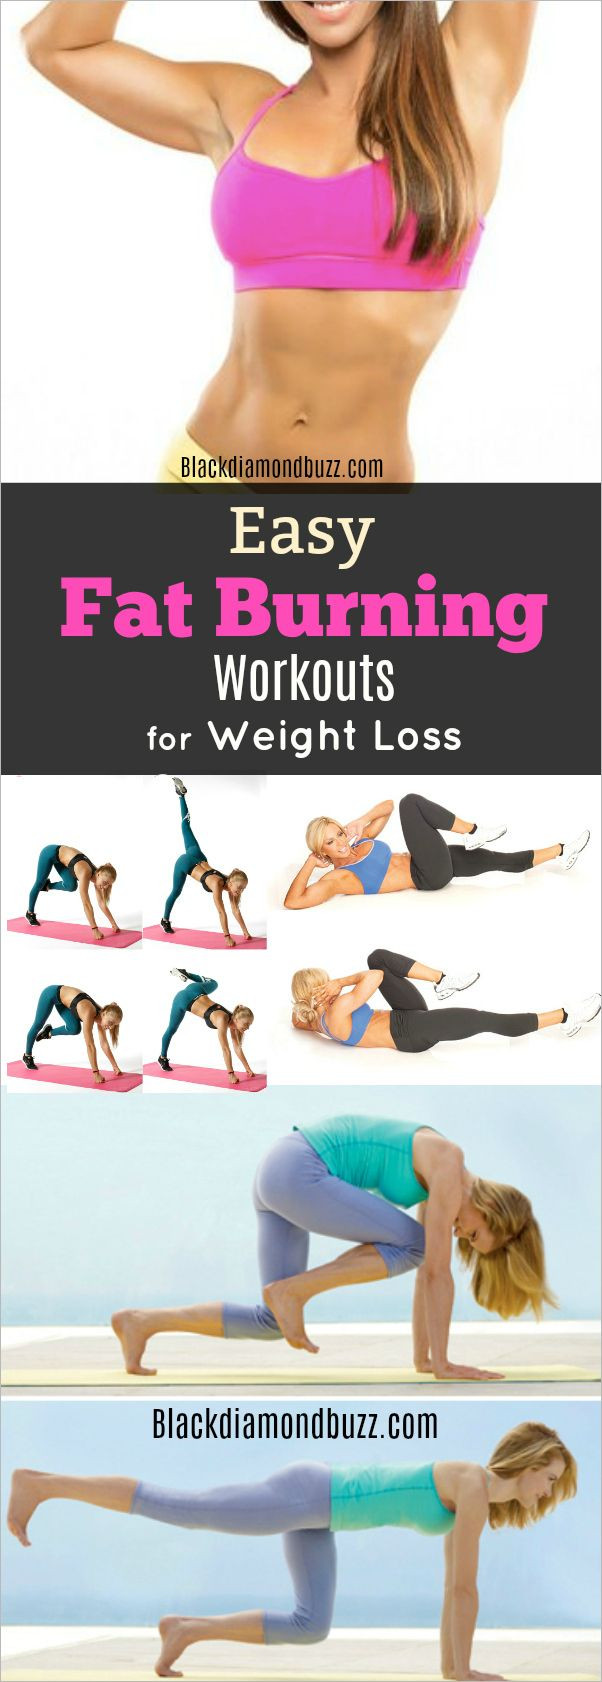 Quick Fat Burning Workouts
 12 Best Fat Burning Workouts For Fast Weight Loss